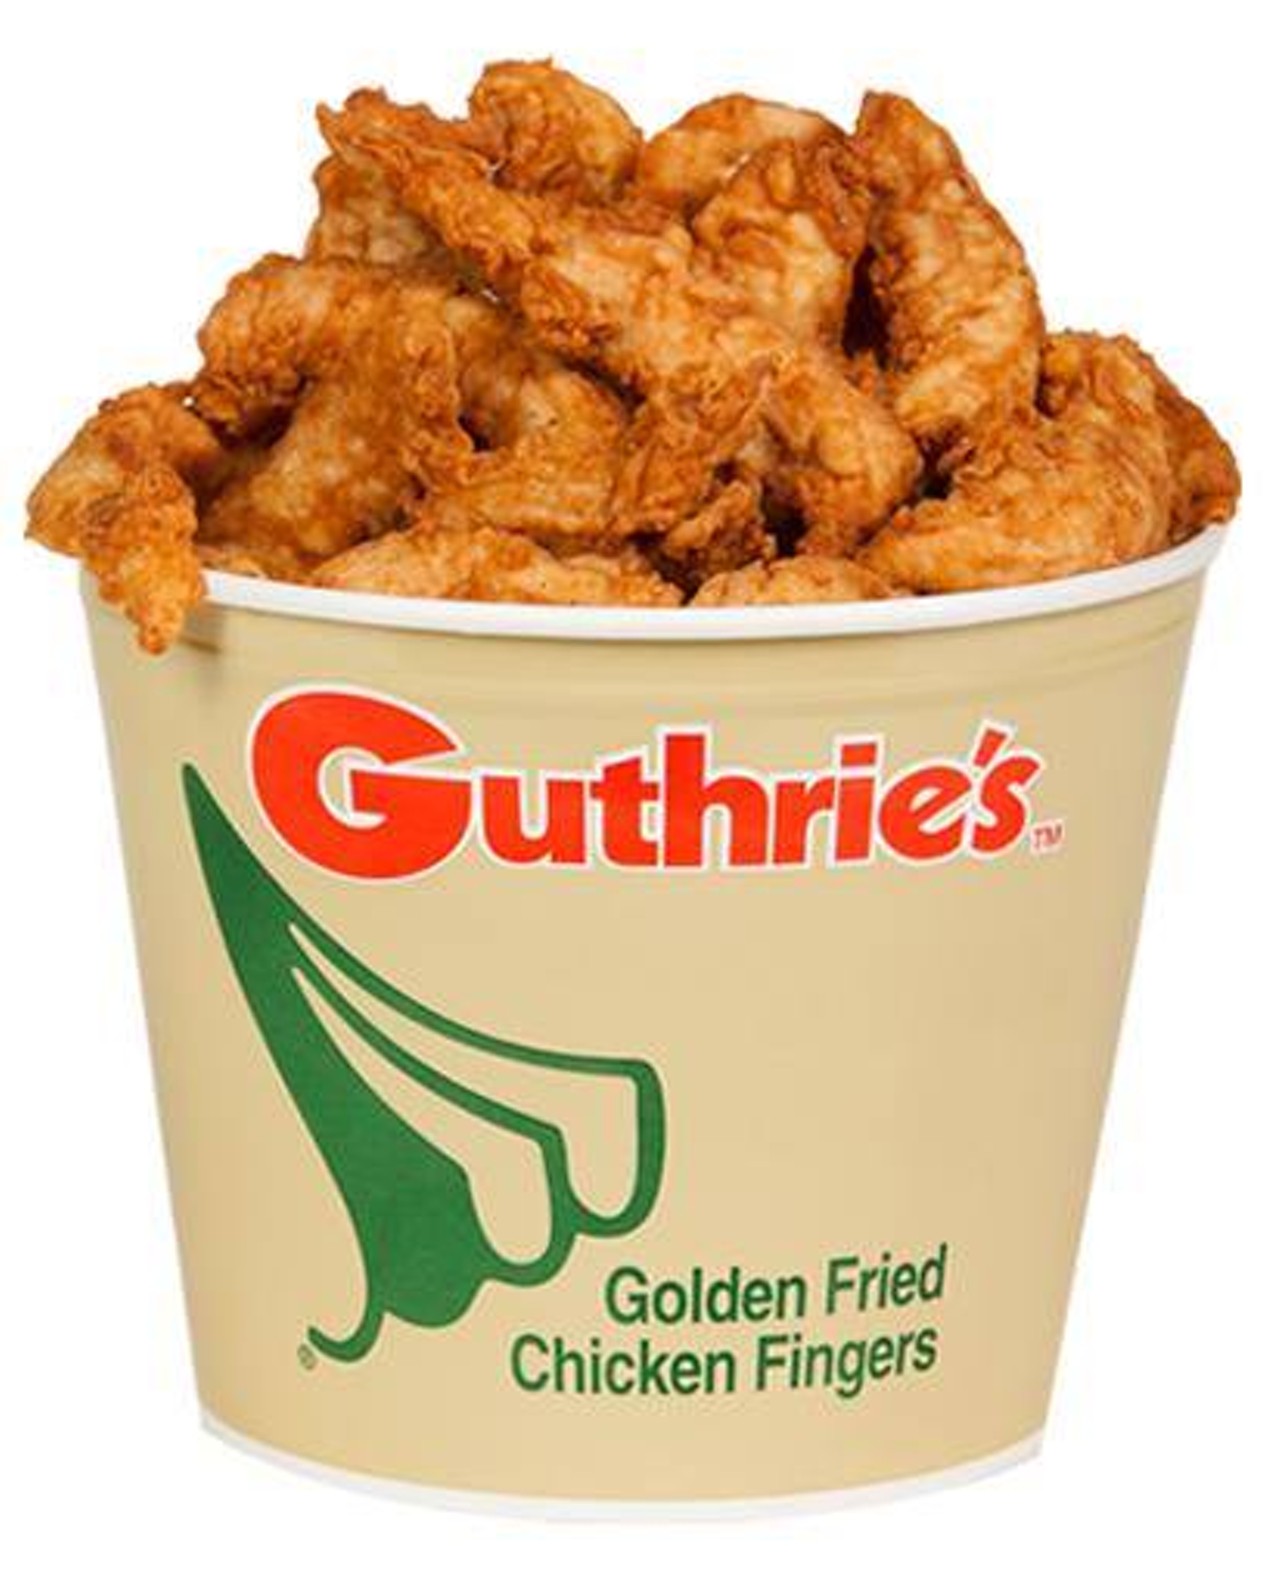 Where: Guthries' of Cleveland - 3465 Steelyard Dr.
Challenge: 30 minutes to finish an entire bucket of Guthries's famous chicken fingers. A bucket includes 25 chicken fingers.
Prize: Trophy and your picture on their Facebook page.
Cost: $23.99